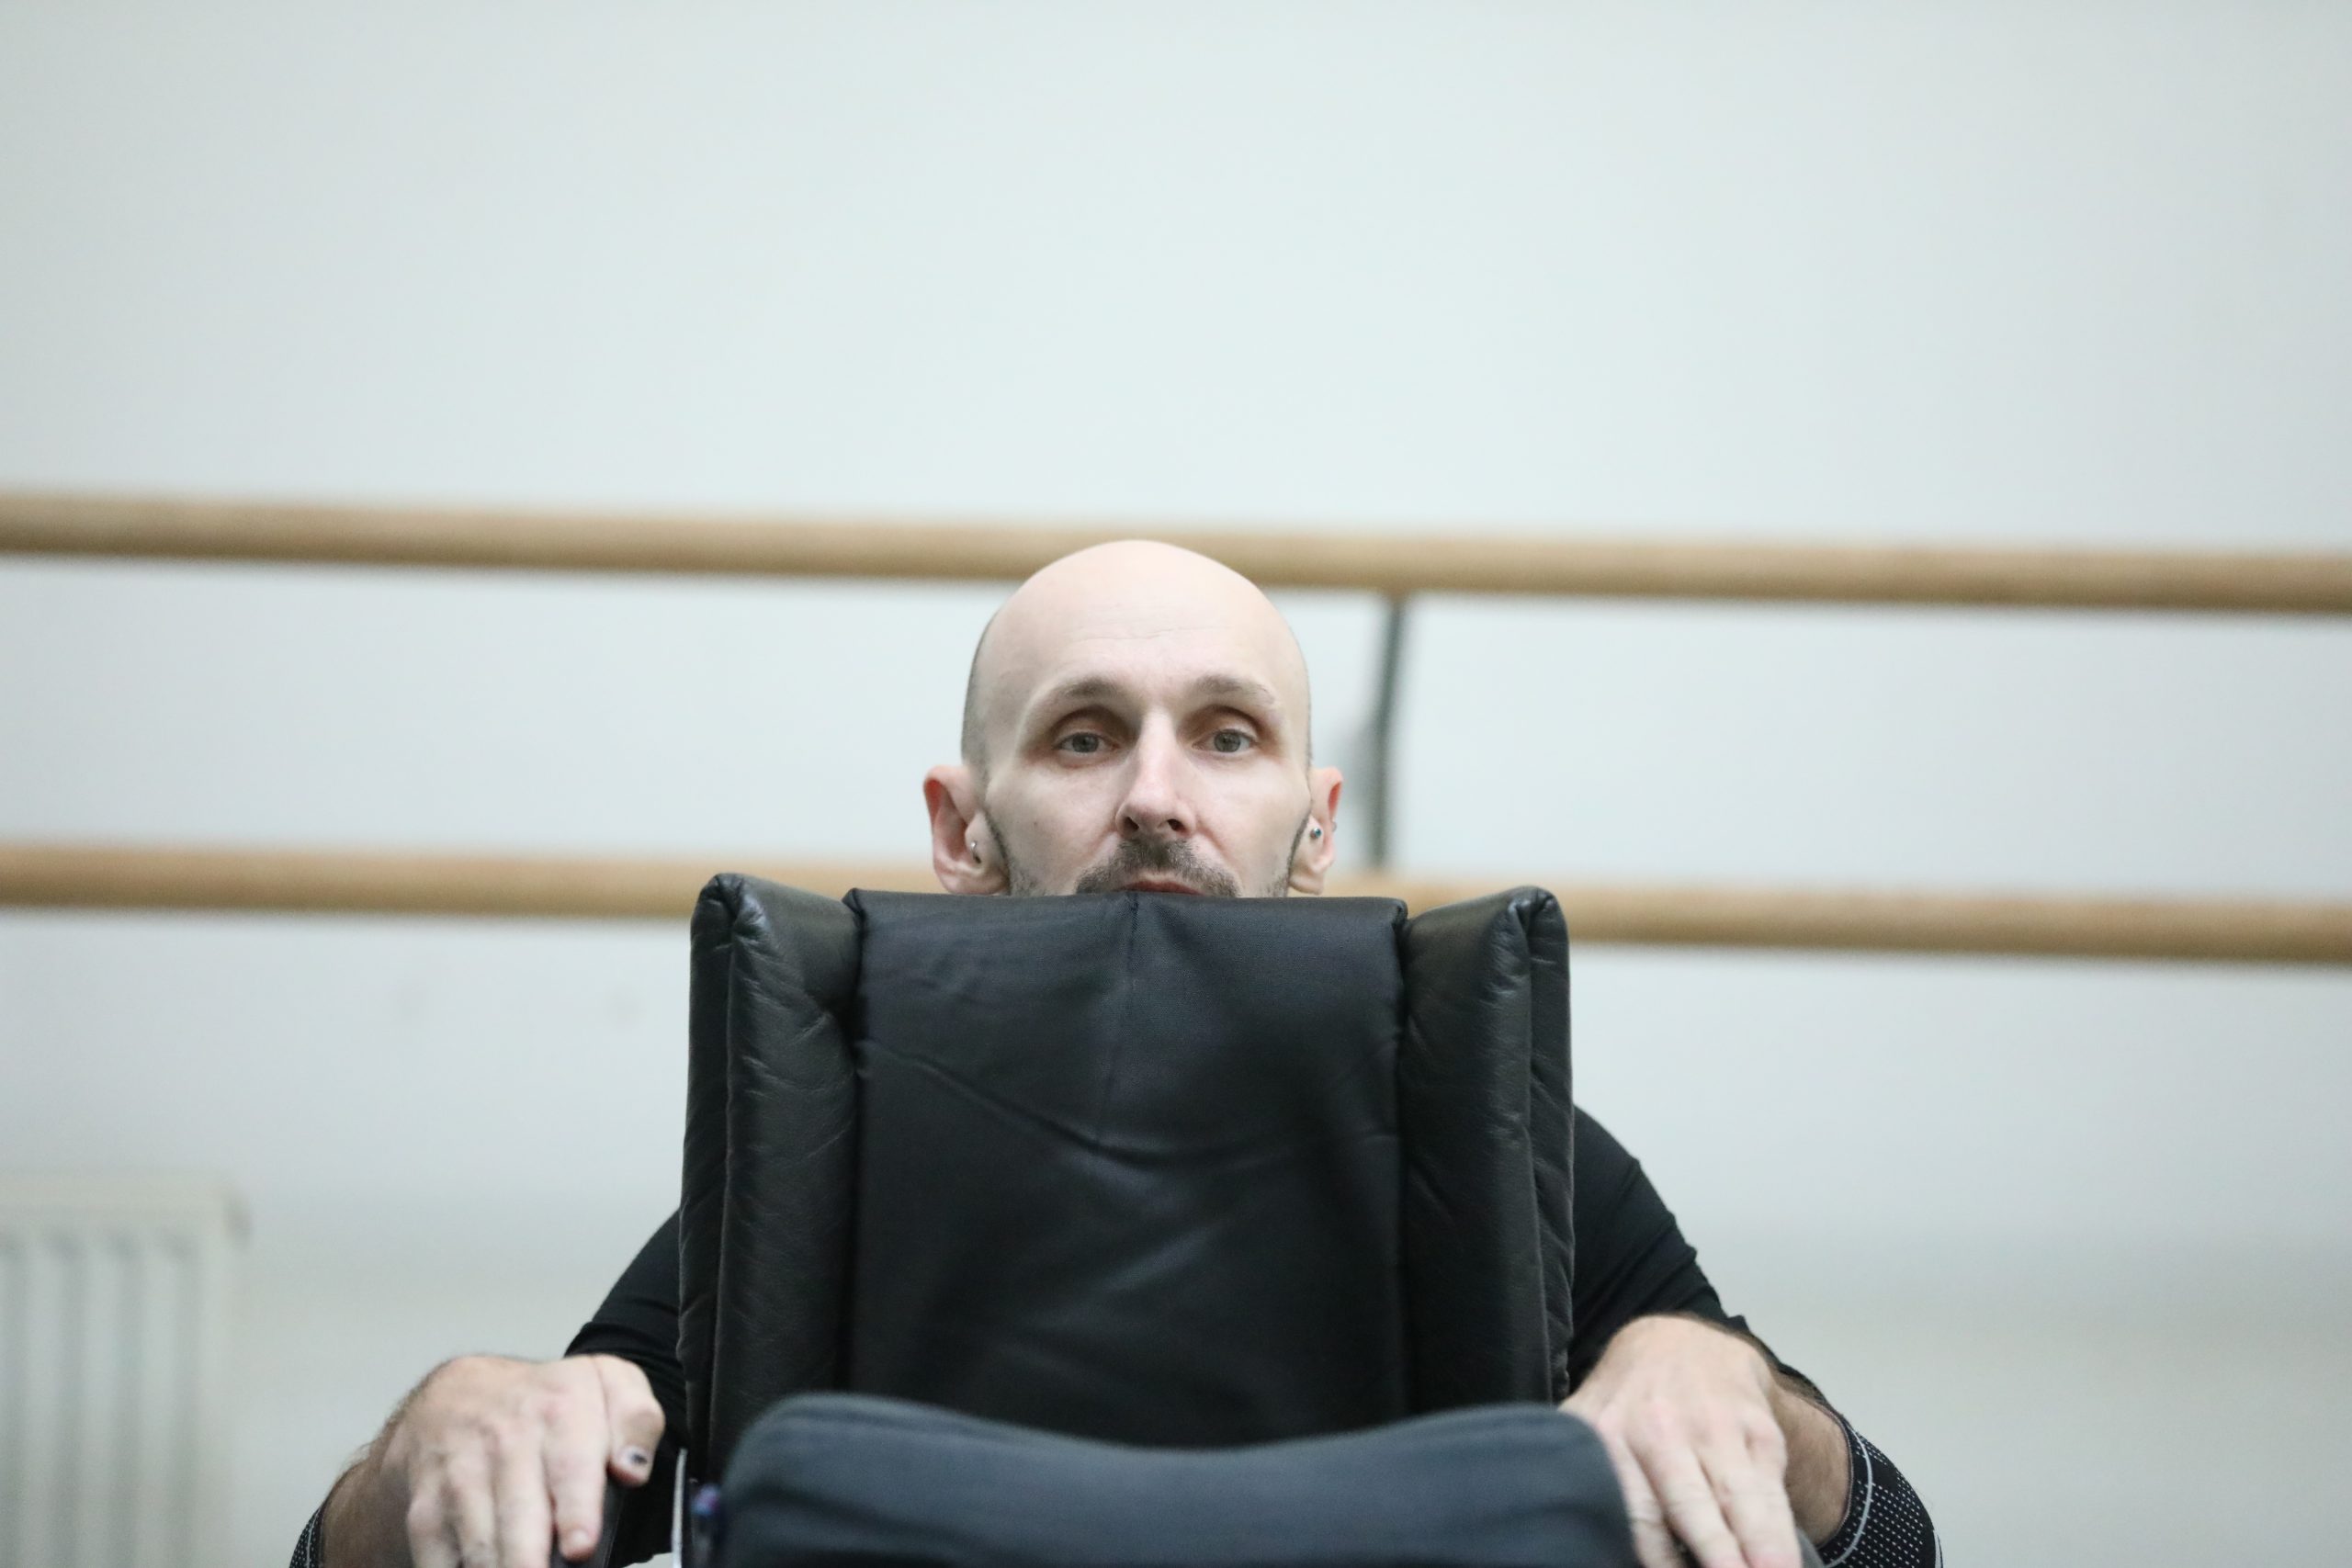 In a dance studio, Marc peers over the top of the back of his black wheelchair, hands extended onto the arms of the chair.